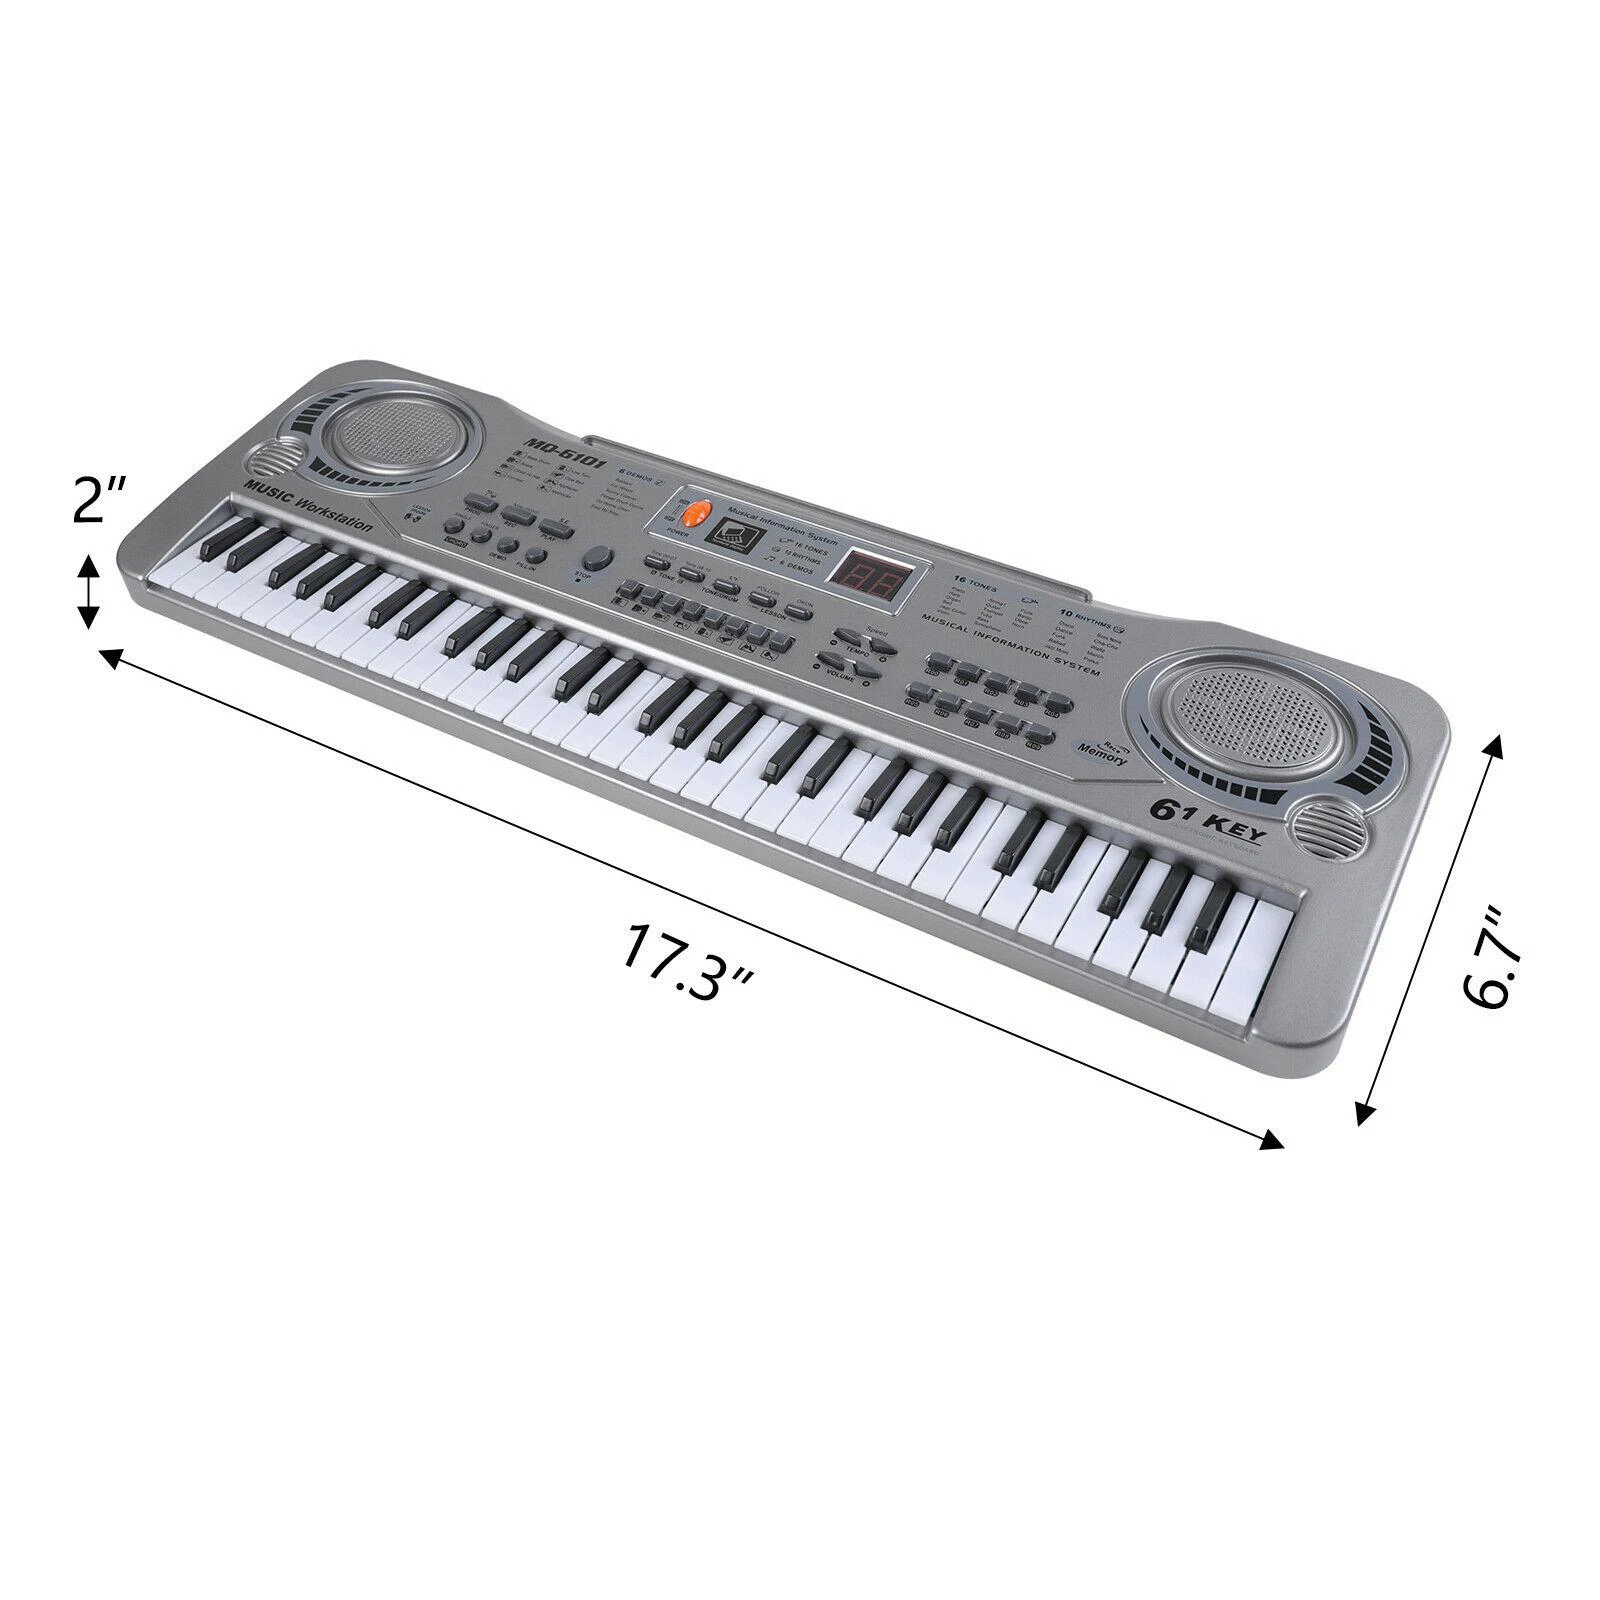 61 Keys Electronic Piano Keyboard Digital Piano Organ Music Instrument w/ Microphone Educational Toys for Beginners Adults Kids